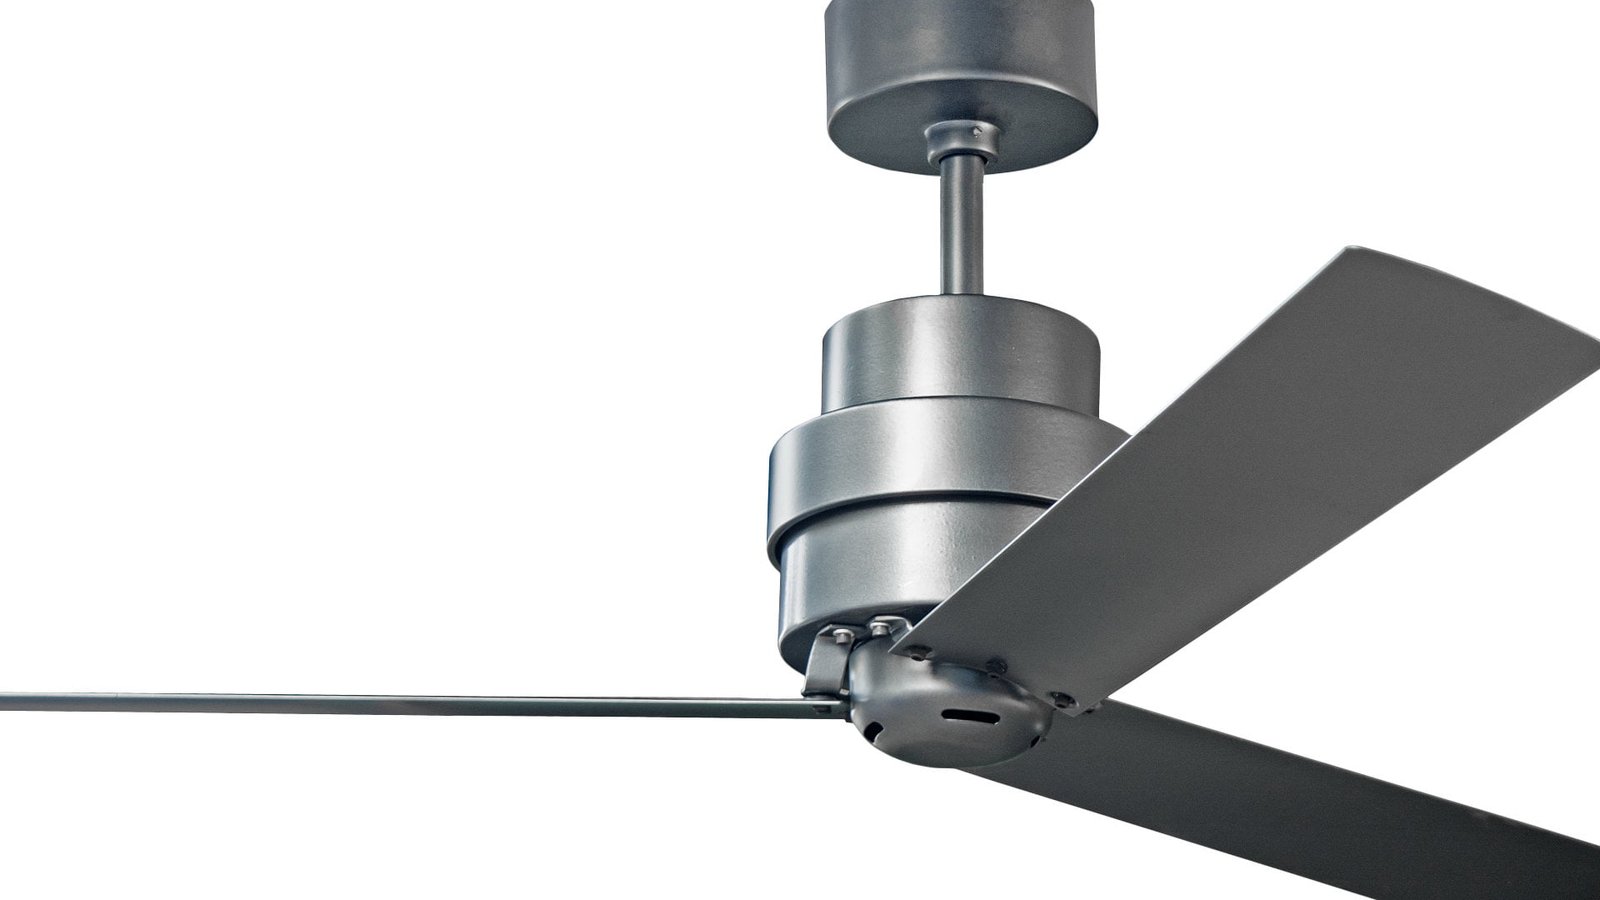 Modern industrial design ceiling fan. Model Hornet from windmill fans with exposed constructional features